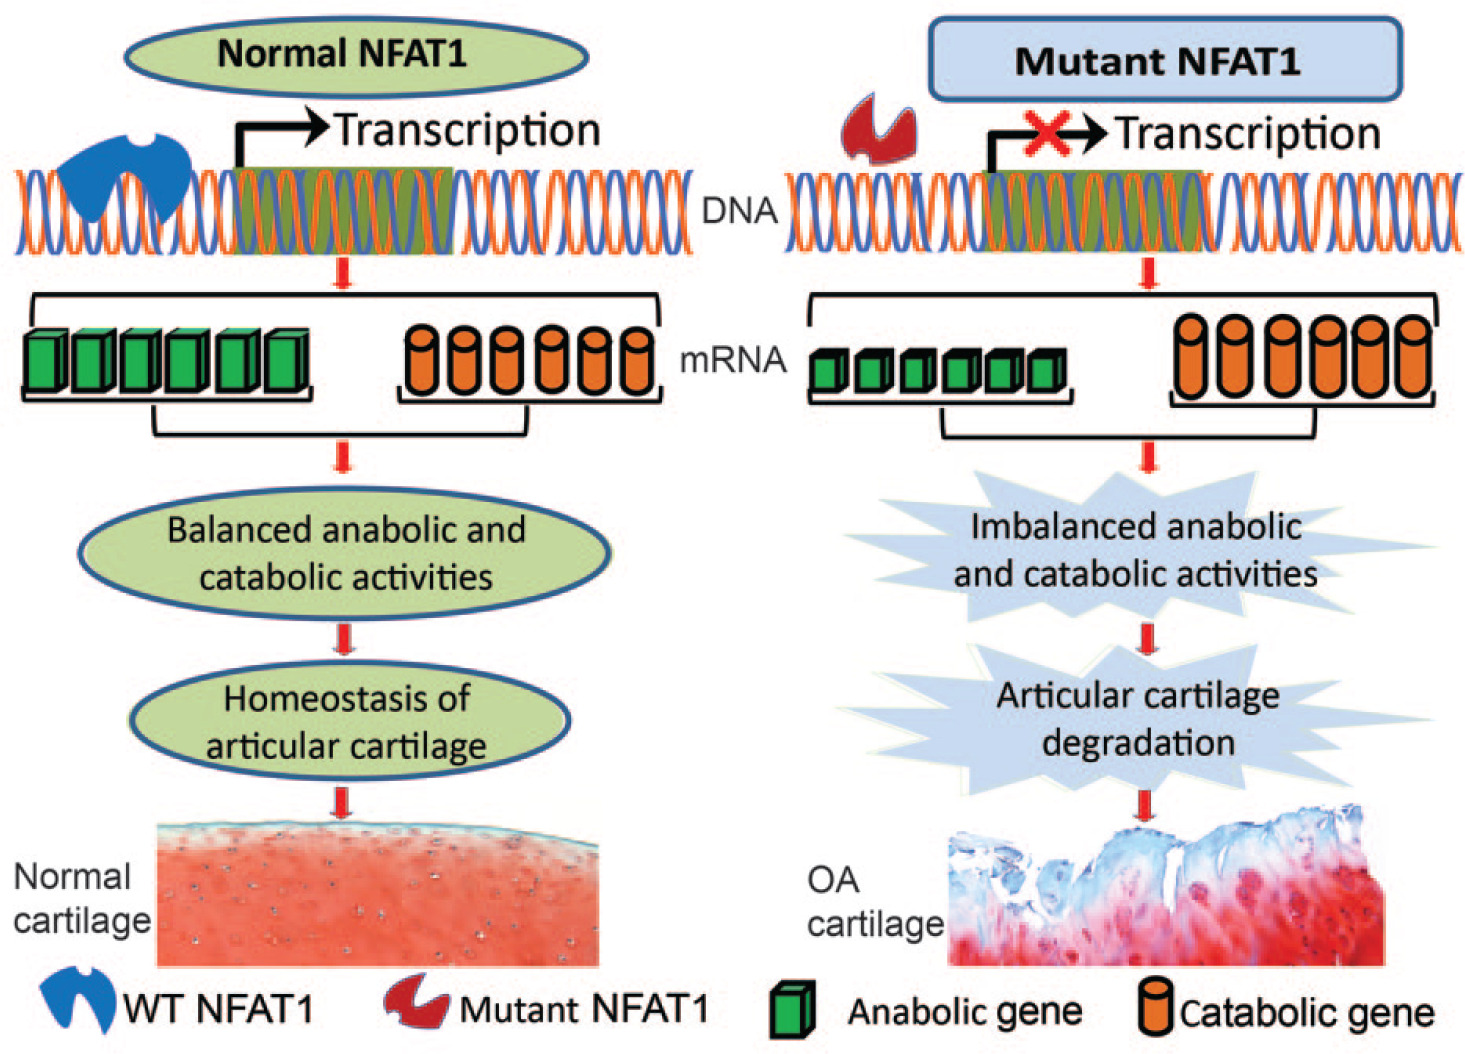 Fig. 5 
          A diagram showing the possible regulatory role of nuclear factor of activated T cells 1 (NFAT1) in the maintenance of articular cartilage (AC) homeostasis and the molecular mechanism of NFAT1 deficiency-induced cartilage degradation. The wild-type (WT) NFAT1 protein binds to the promoter region and regulates the expression of specific anabolic and catabolic genes in WT chondrocytes, and possibly also in synovial cells. In contrast, the mutant NFAT1 protein loses the ability to bind to the promoter or regulate the expression of its target genes, which leads to cartilage degradation and predisposes affected joints to osteoarthritis (OA).
        